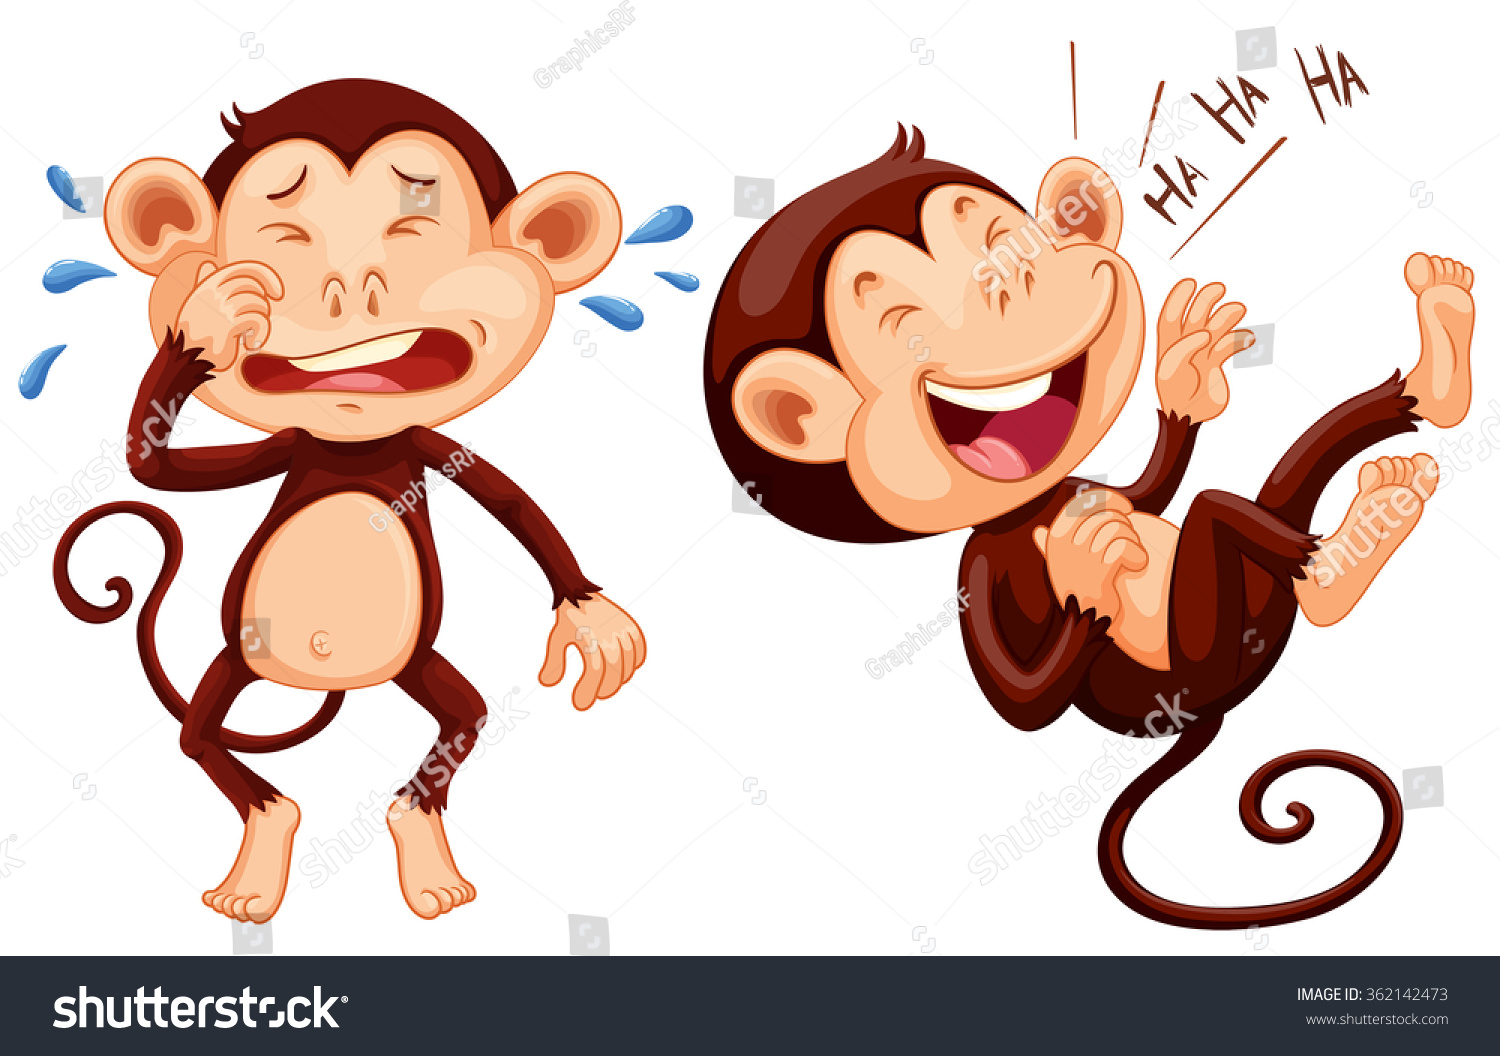 monkey laughing clipart - photo #13